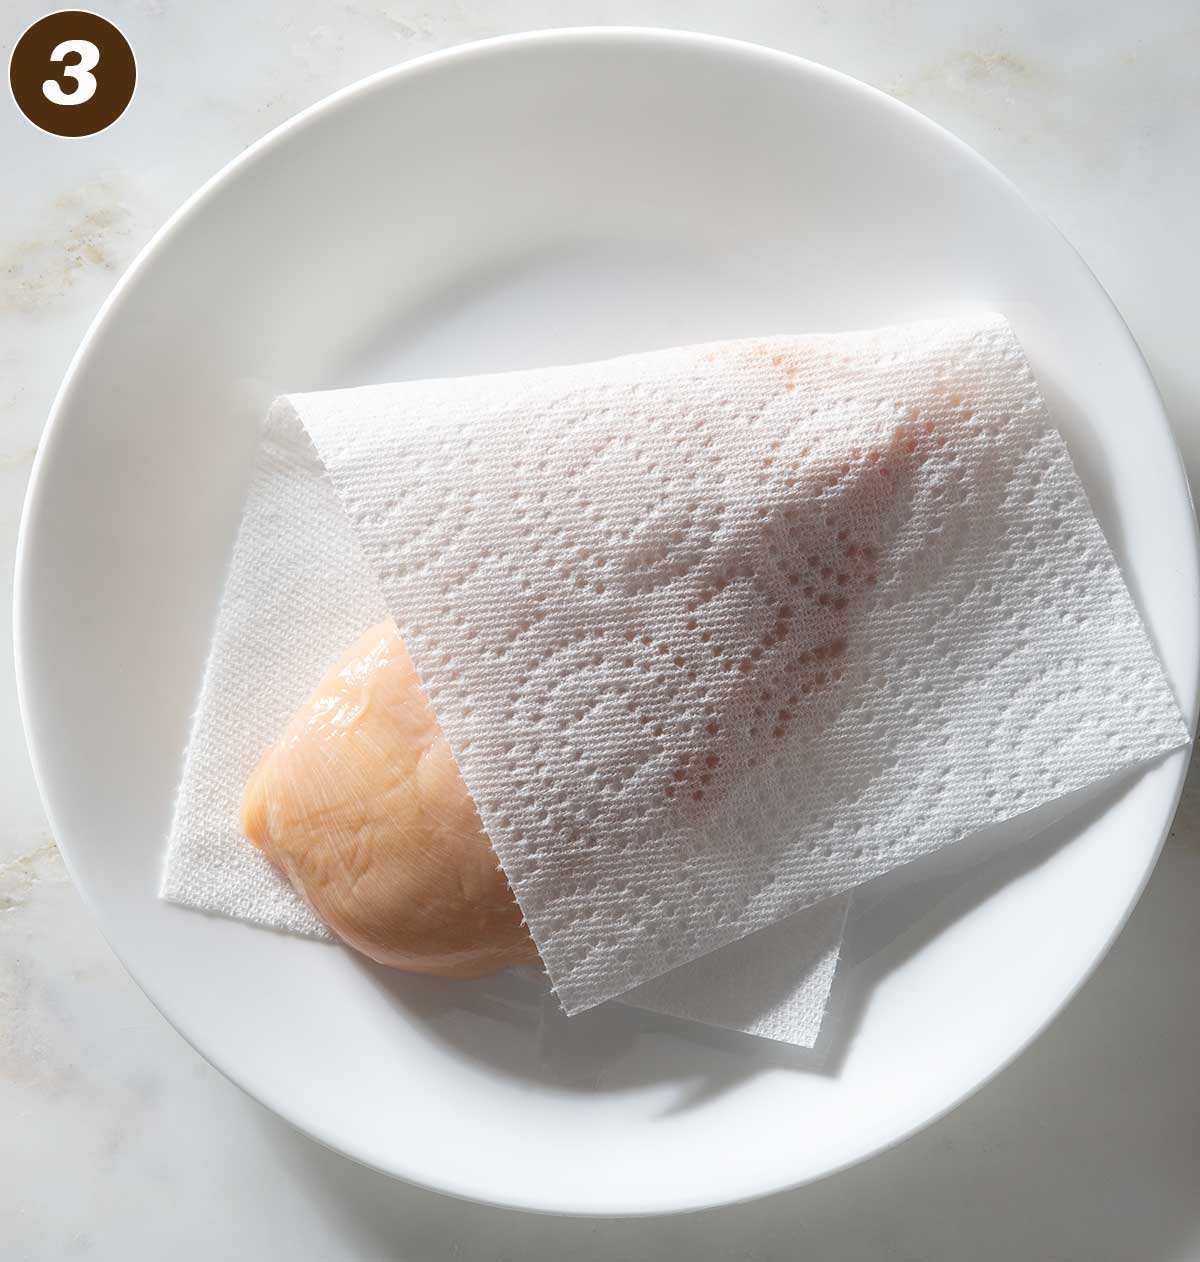 Chicken breast with paper towel on a plate.